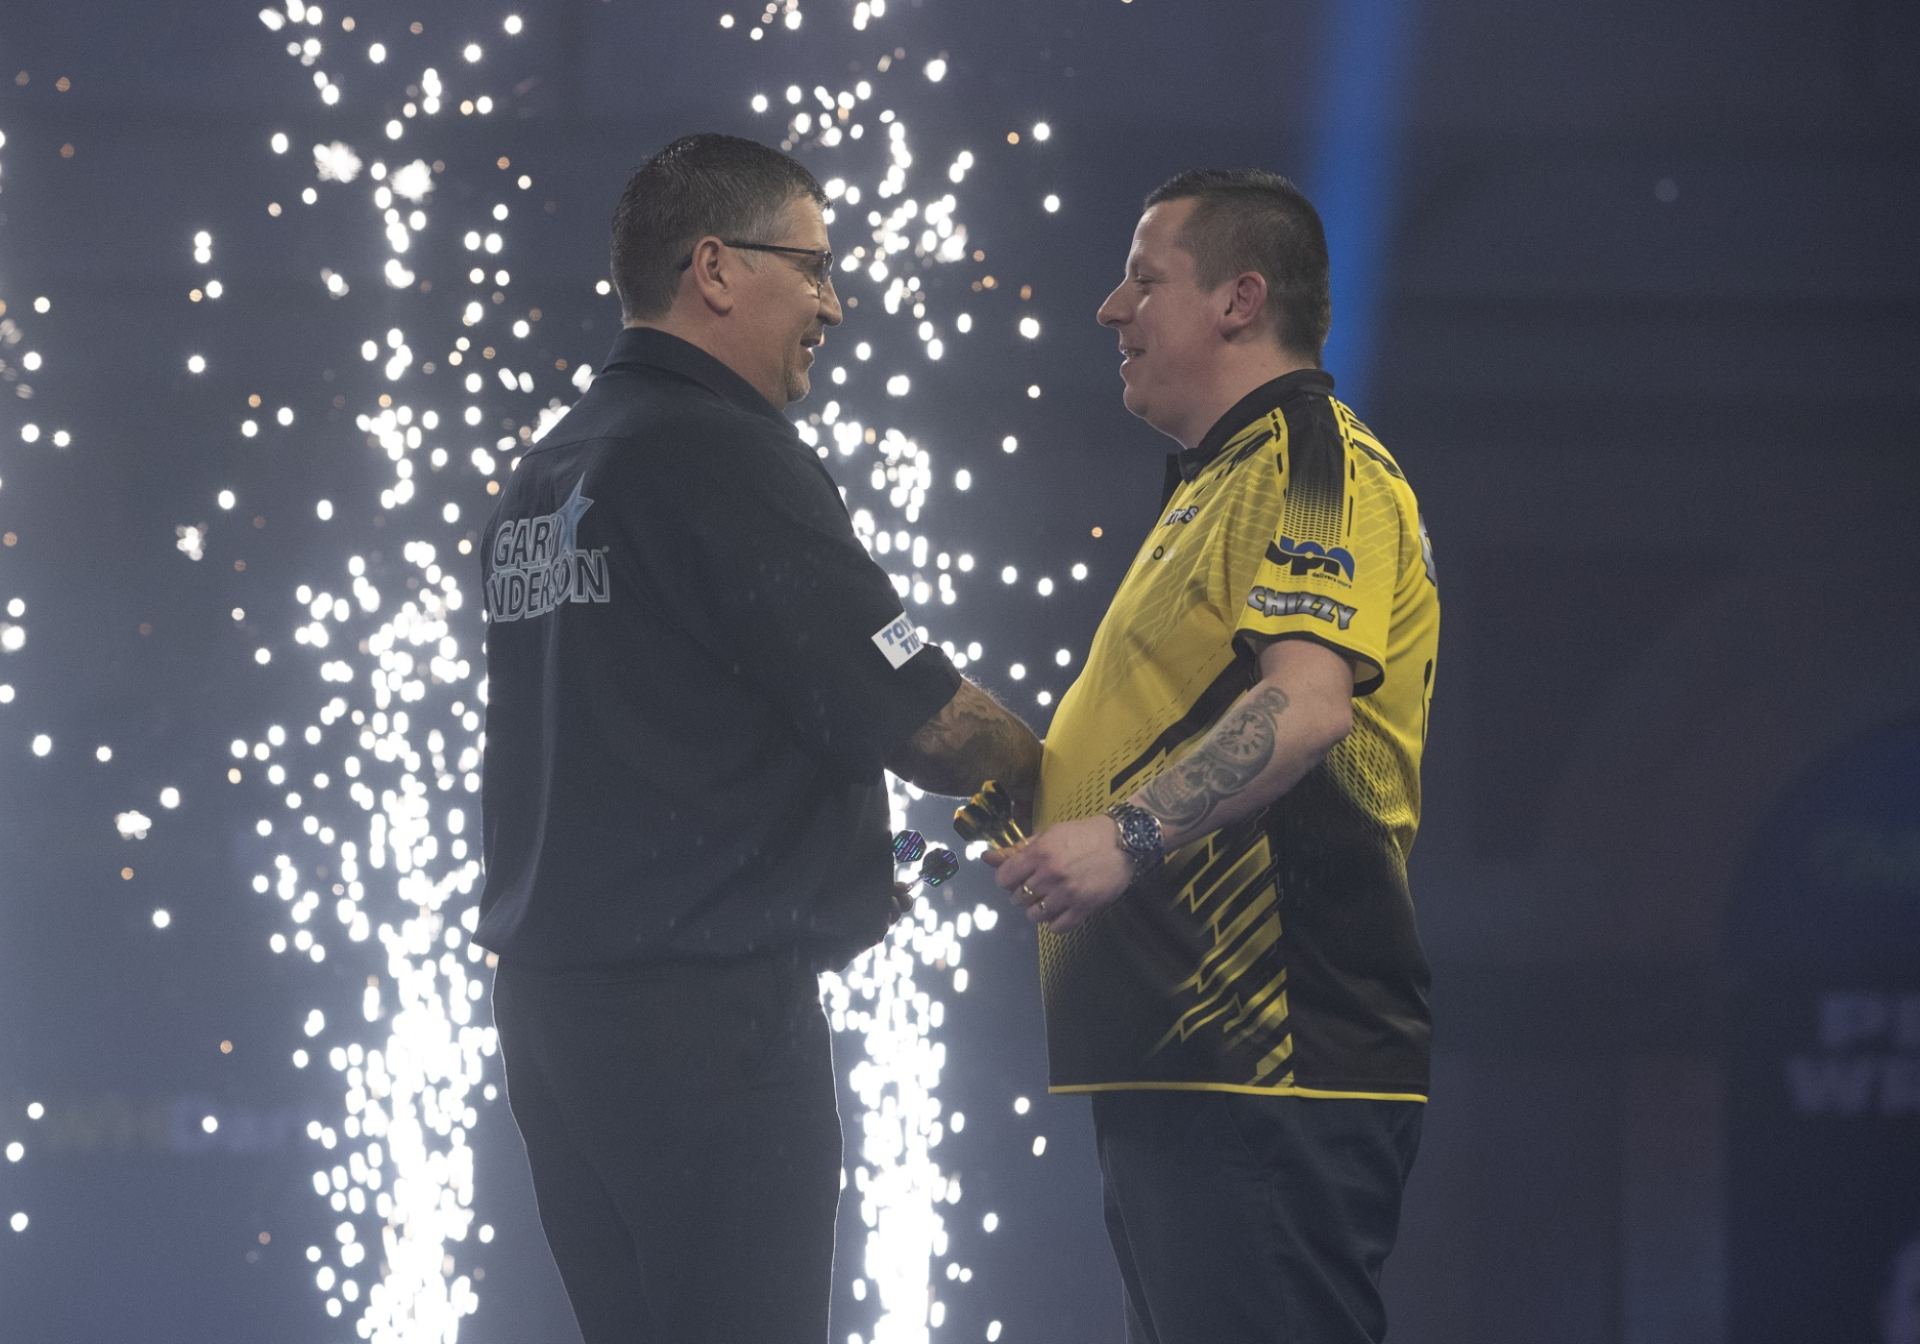 Gary Anderson and Dave Chisnall